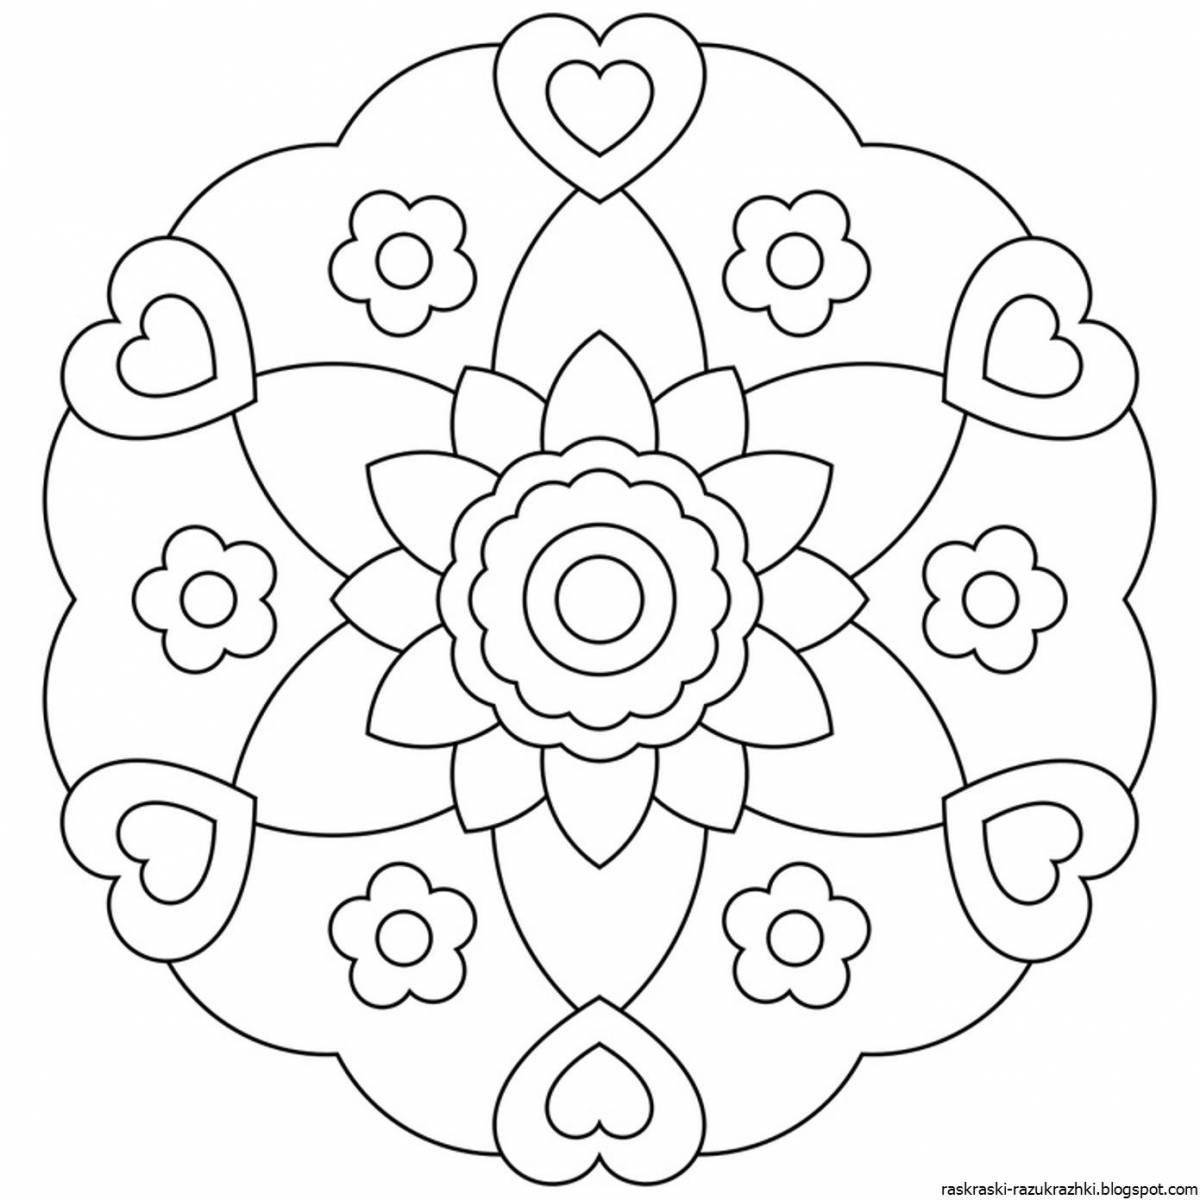 Colorful coloring pages for preschoolers